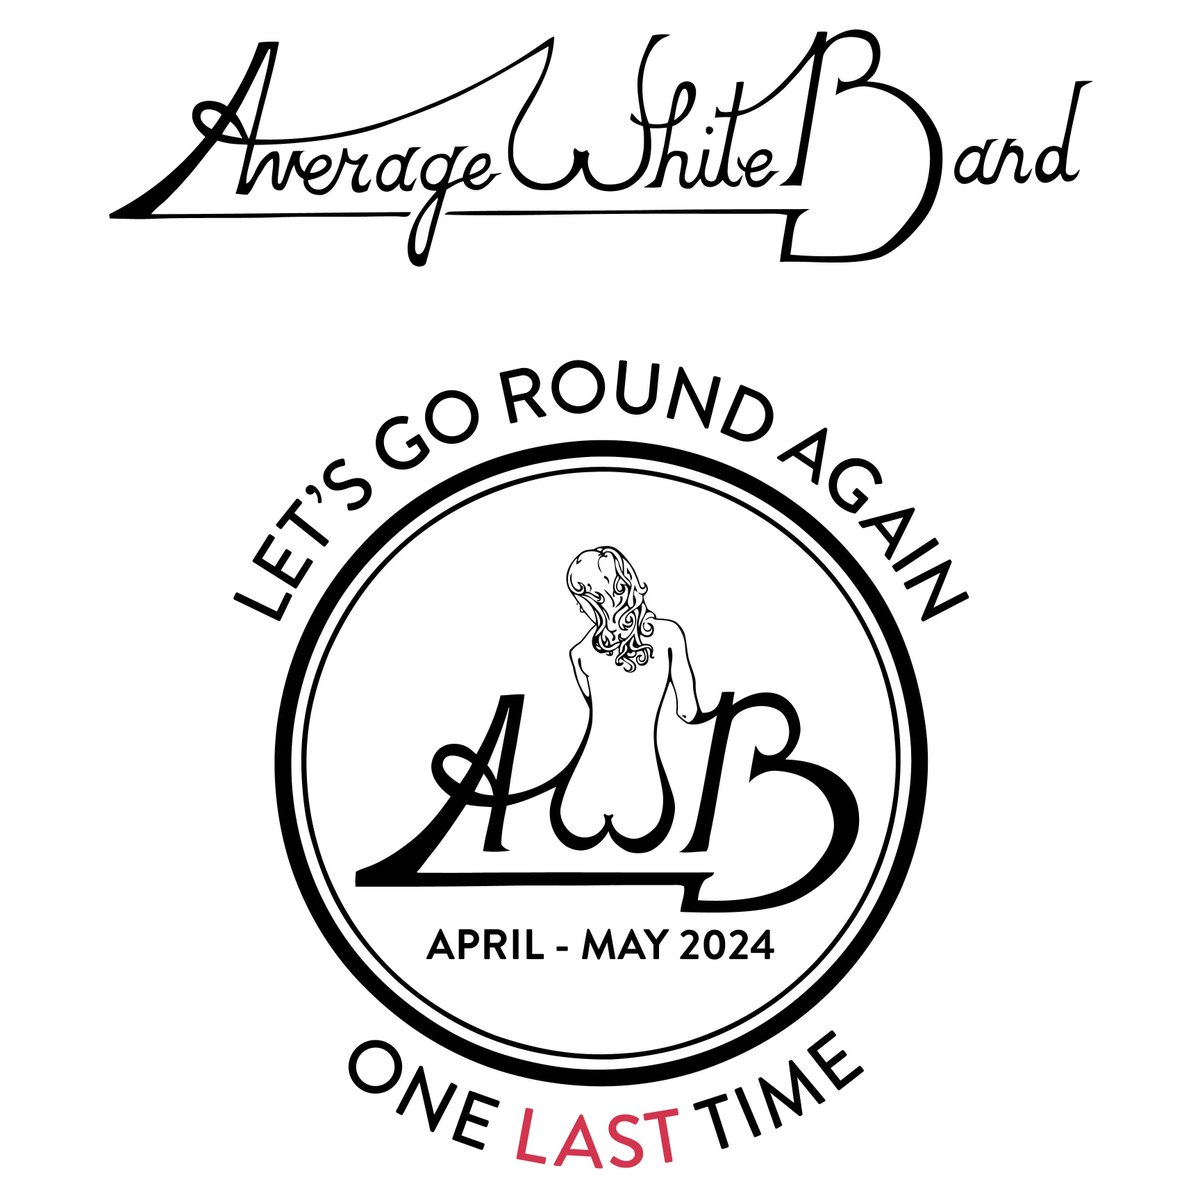 There's still a handful of tickets for tonight's Average White Band show! As part of their farewell tour, you don't want to miss their biggest hits, such as Let's Go Round Again or Cut The Cake! 📅 Mon 6 May 2024 🎟 bit.ly/TTOHawbtour